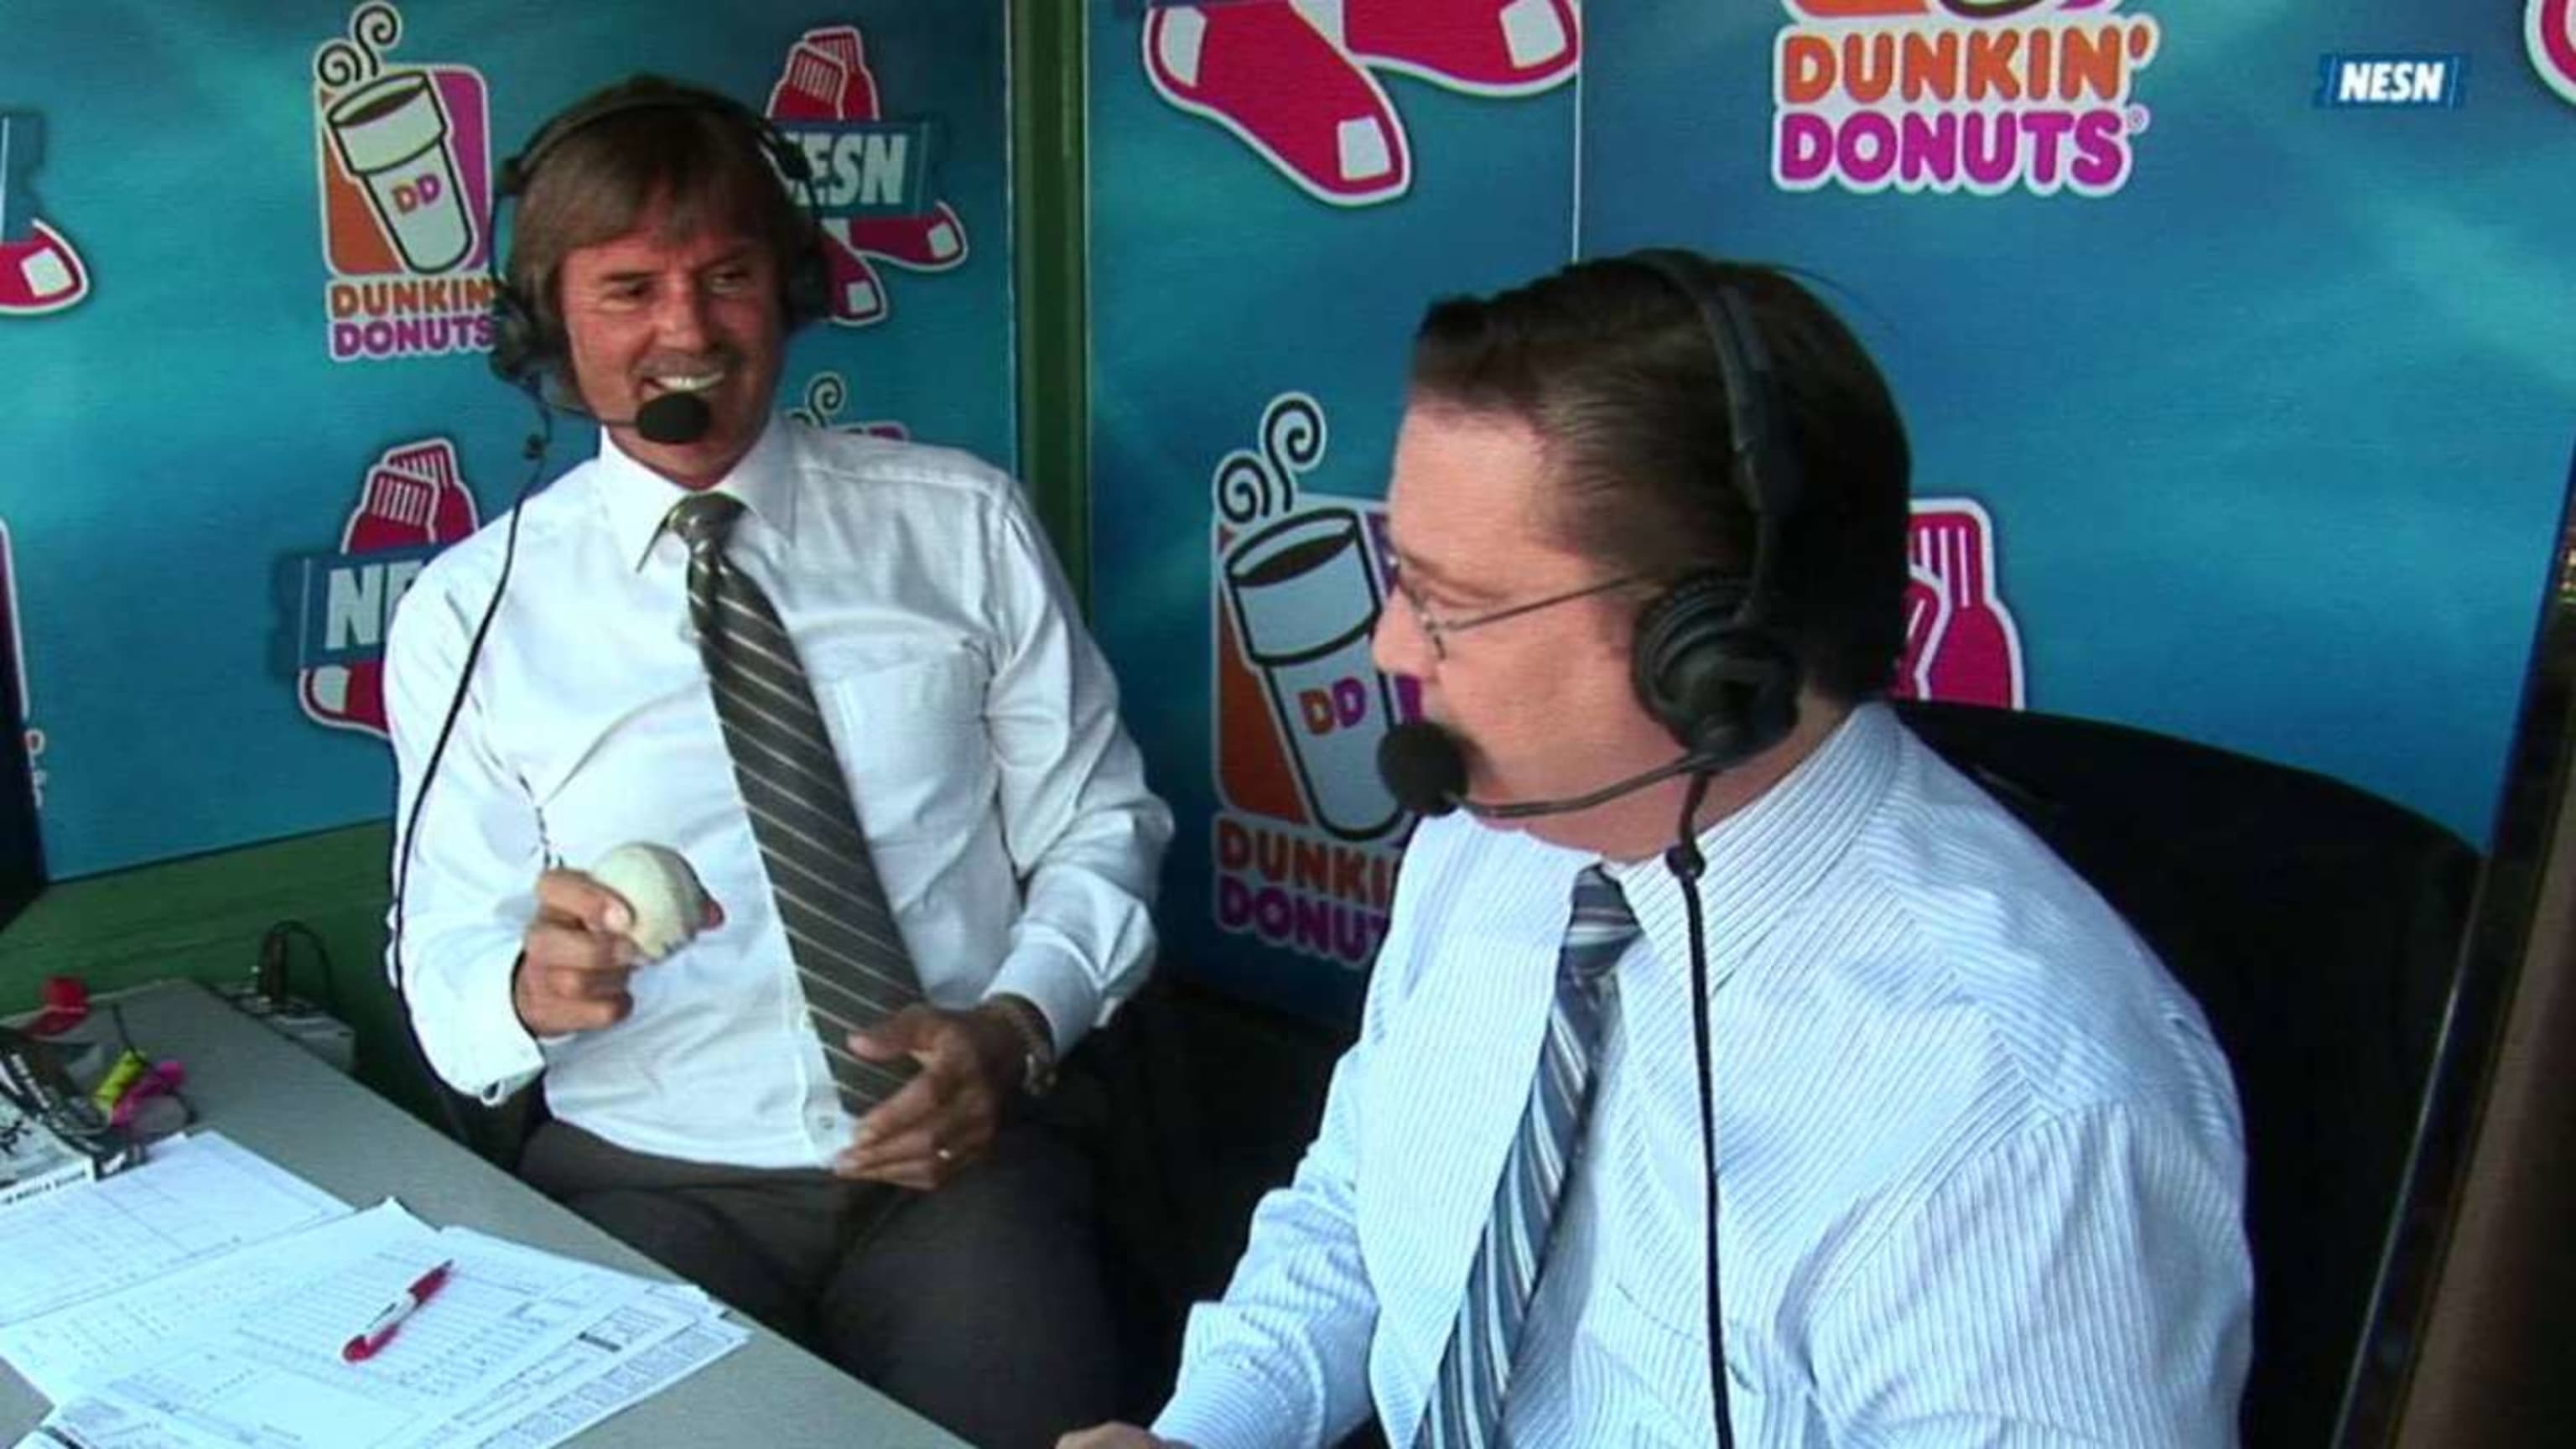 Dennis Eckersley Discusses Upcoming Retirement From Booth